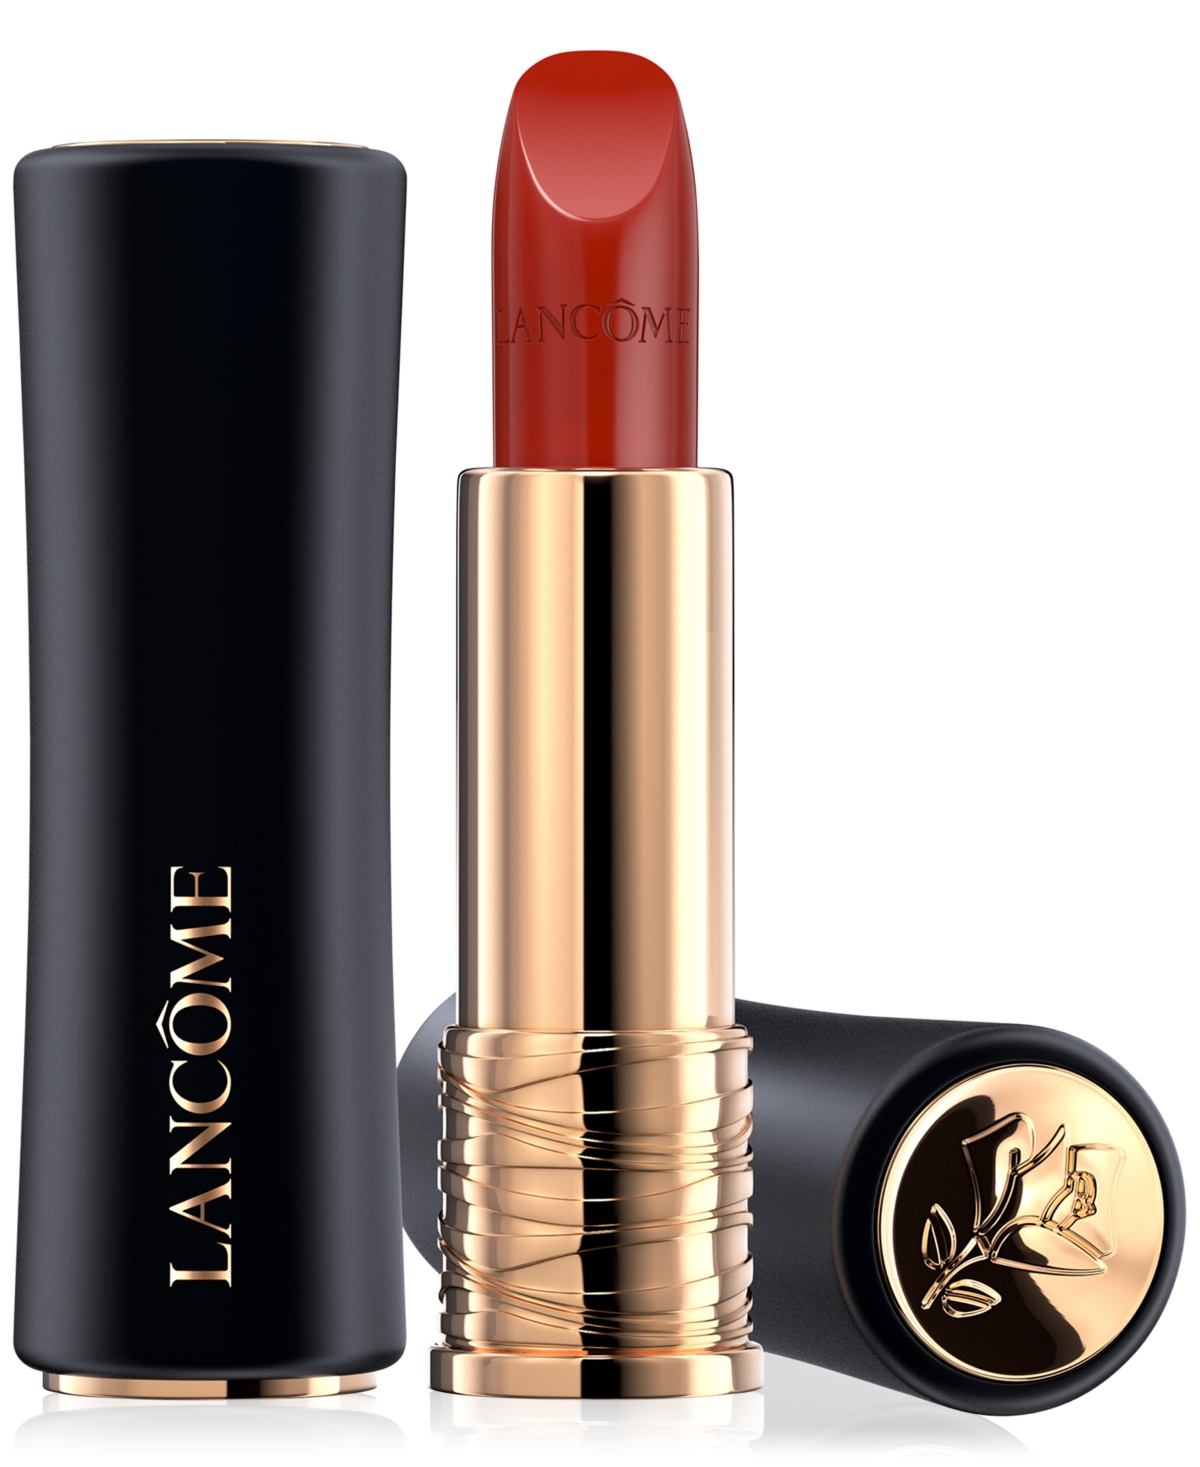 Lancôme L'absoluâ Rouge Cream Lipstick In -french-touch